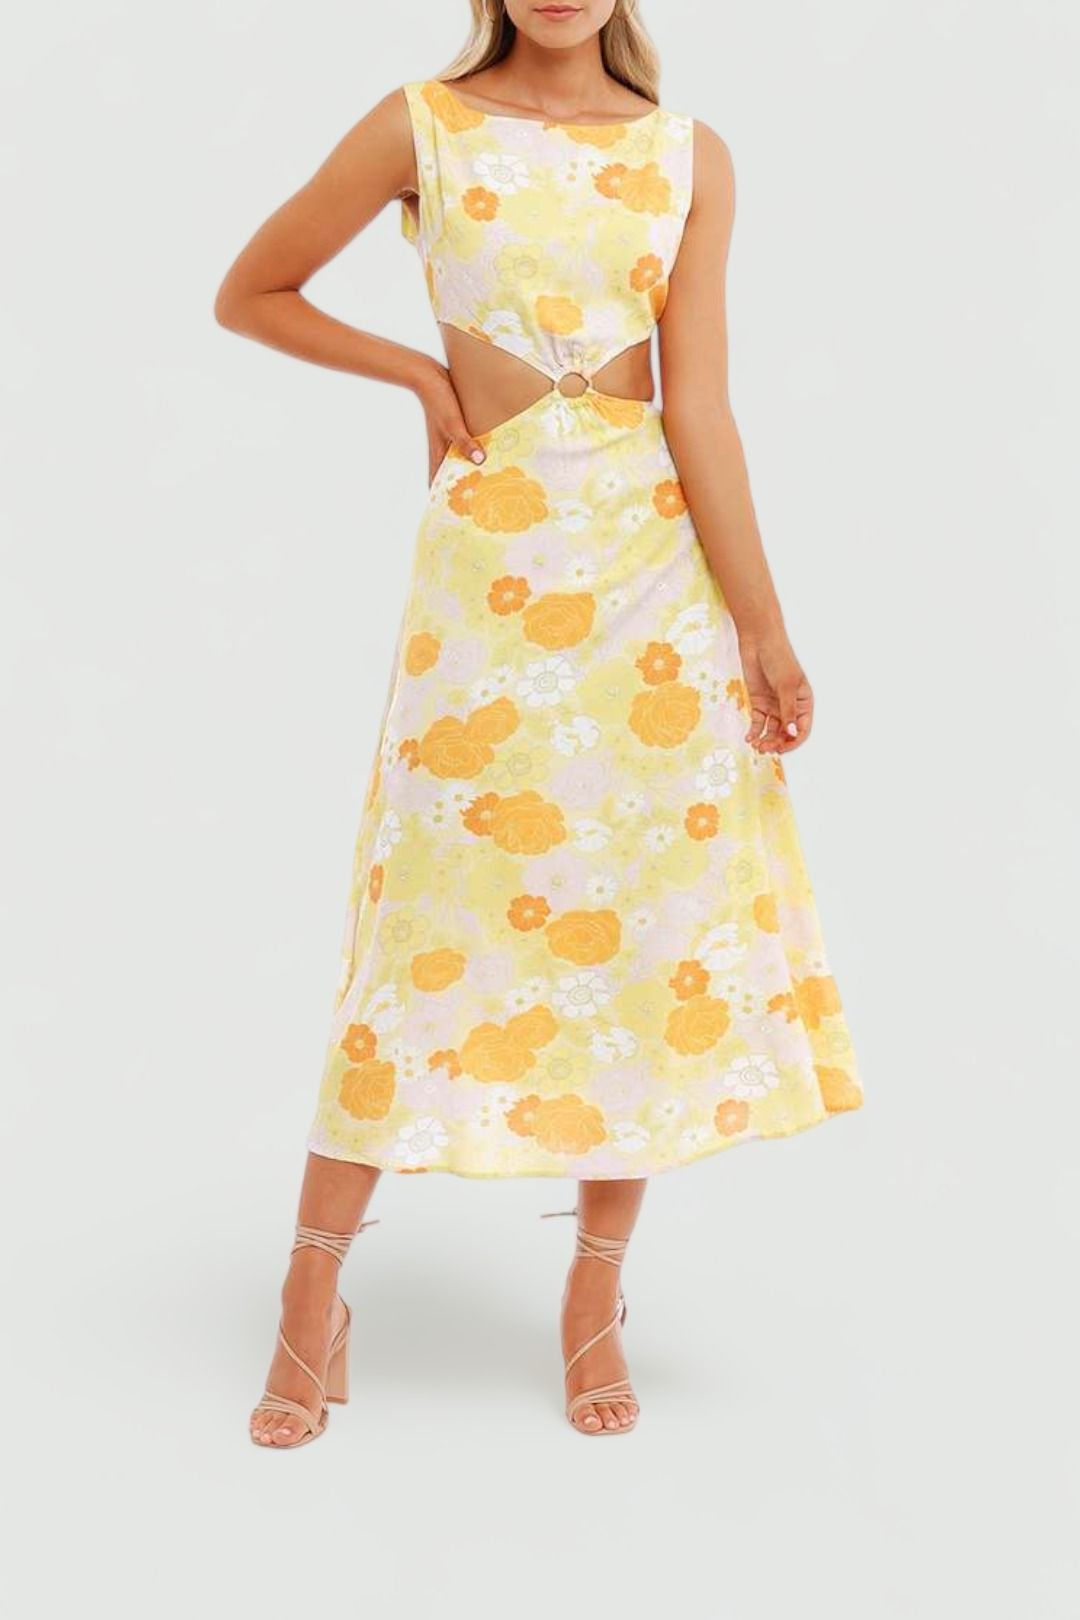 Charlie Holiday Clemence Dress Mod Floral midi